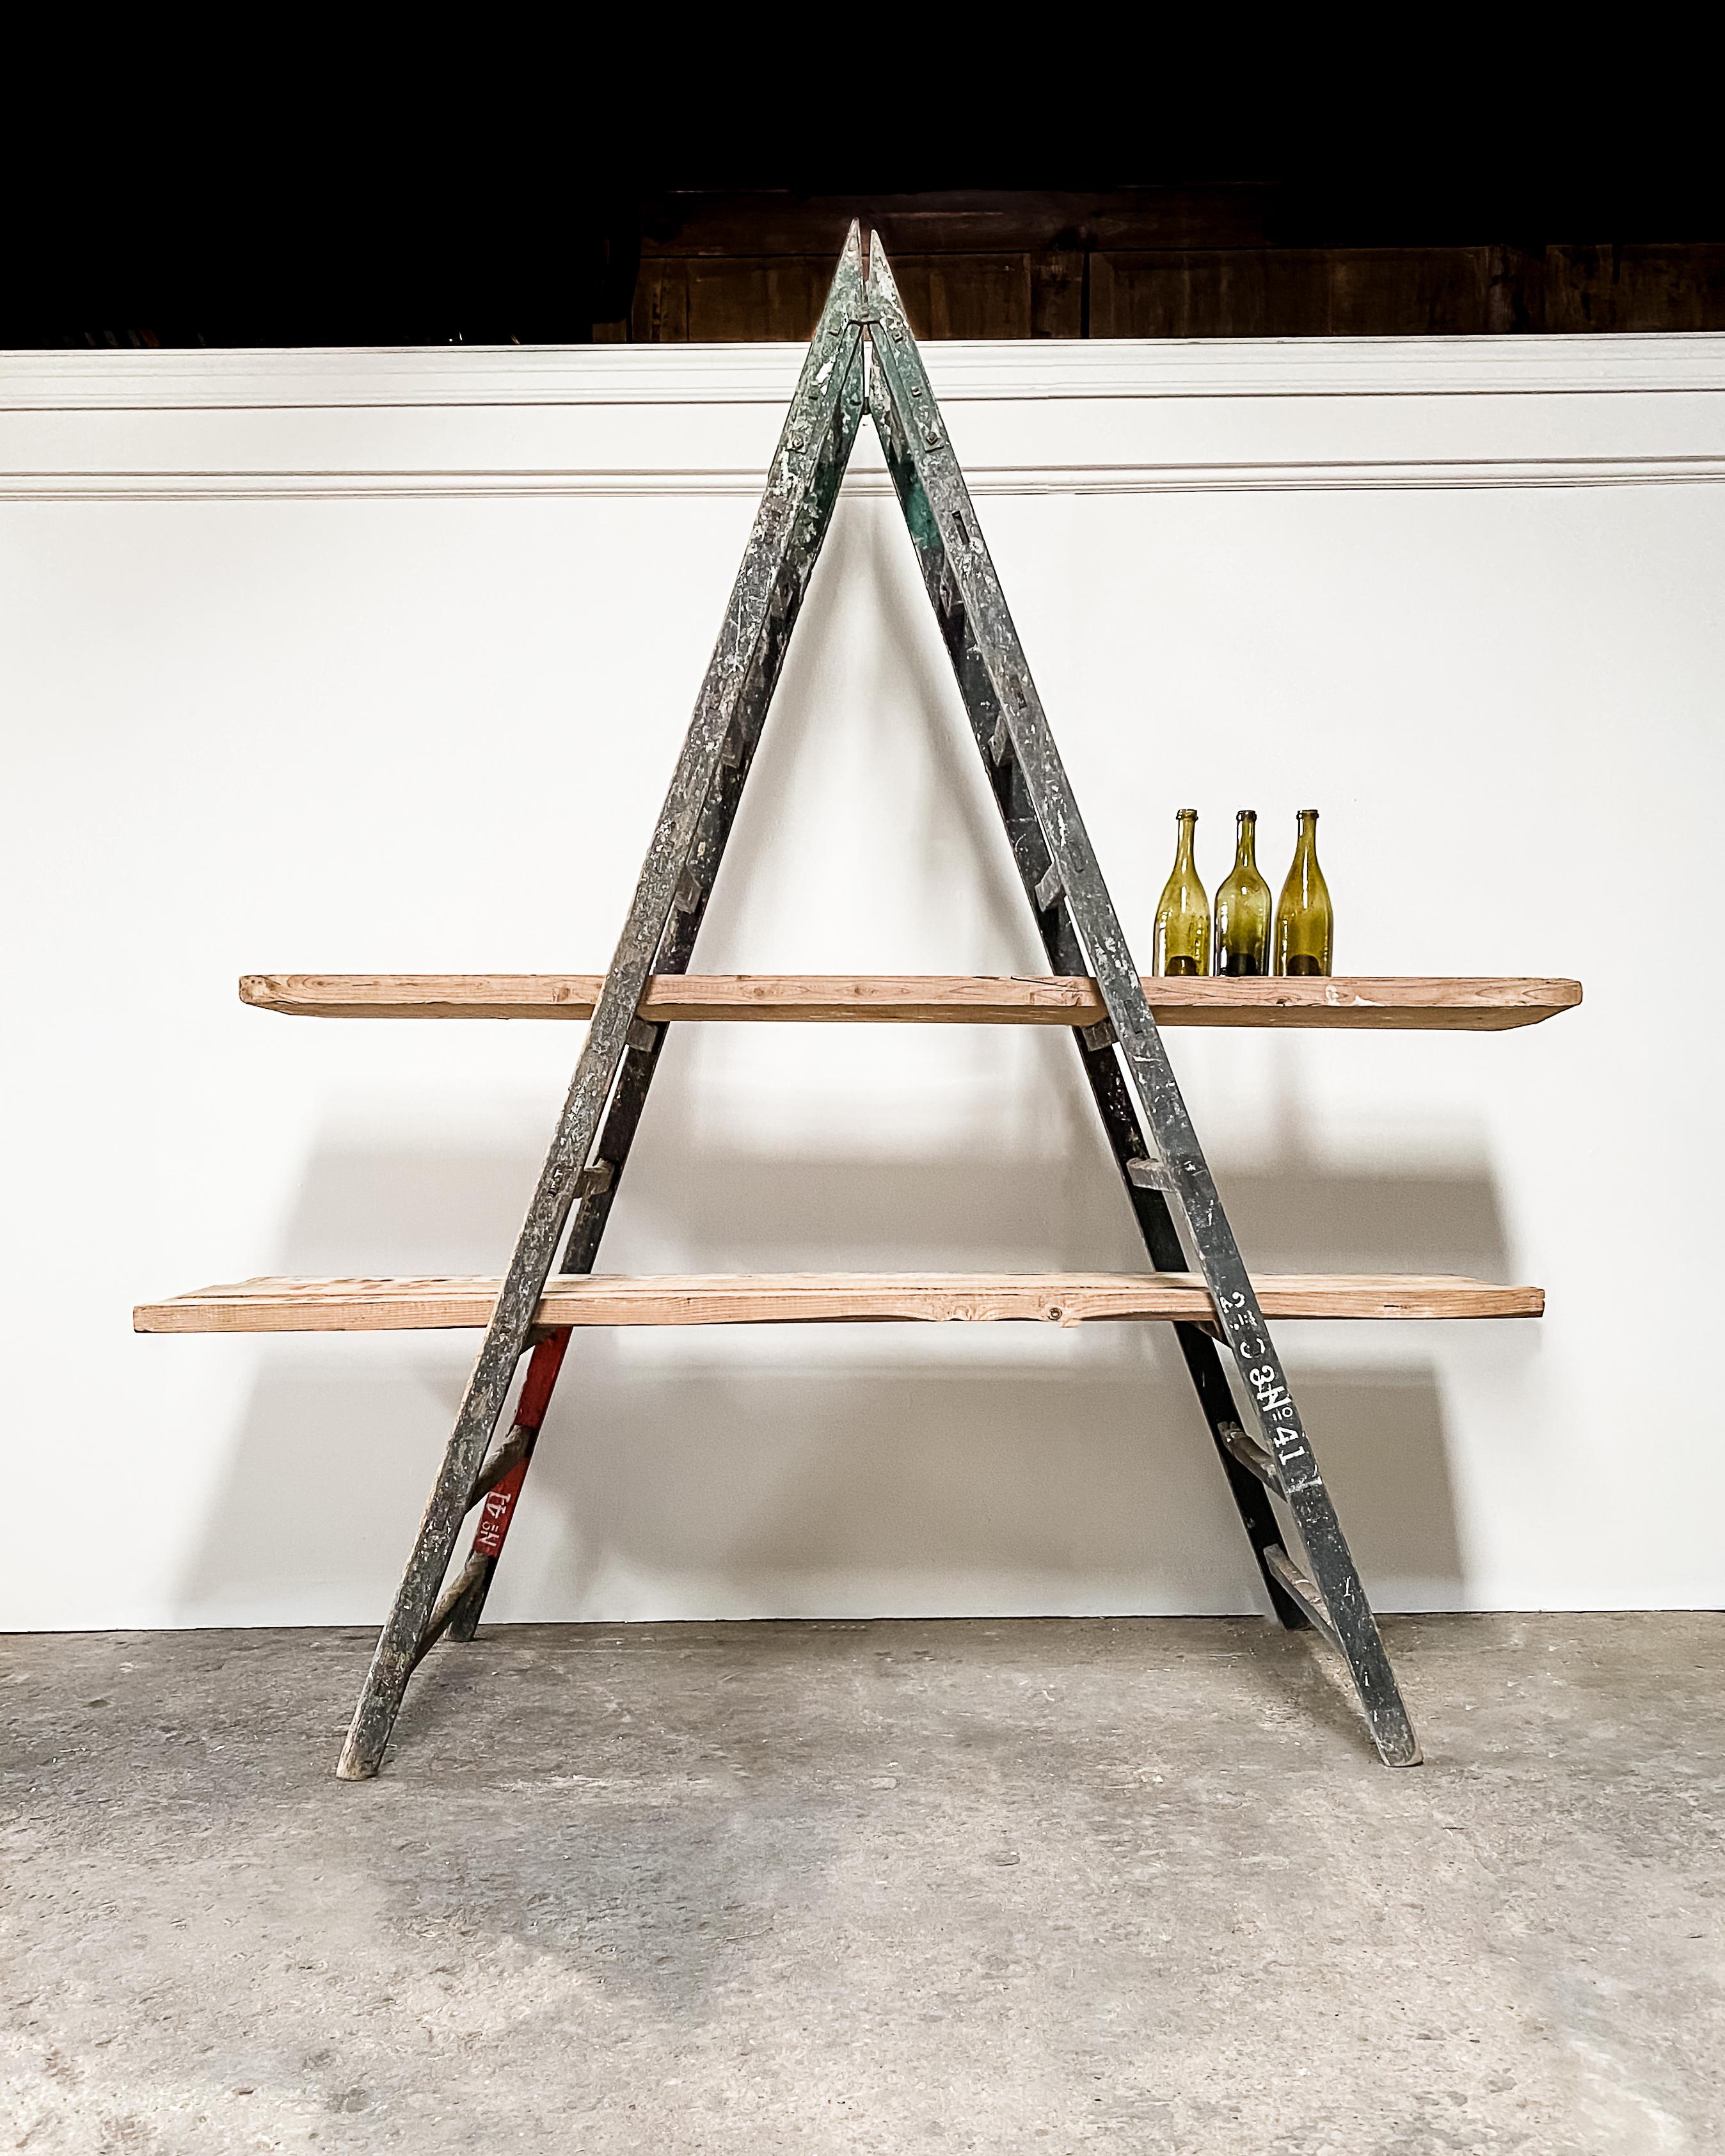 A unique bookshelf created from an old French painter’s ladder coupled with reclaimed scaffolding boards from Belgium. When combined together, the two seemingly utilitarian pieces have been transformed into a one-of-a-kind bookshelf for use in any